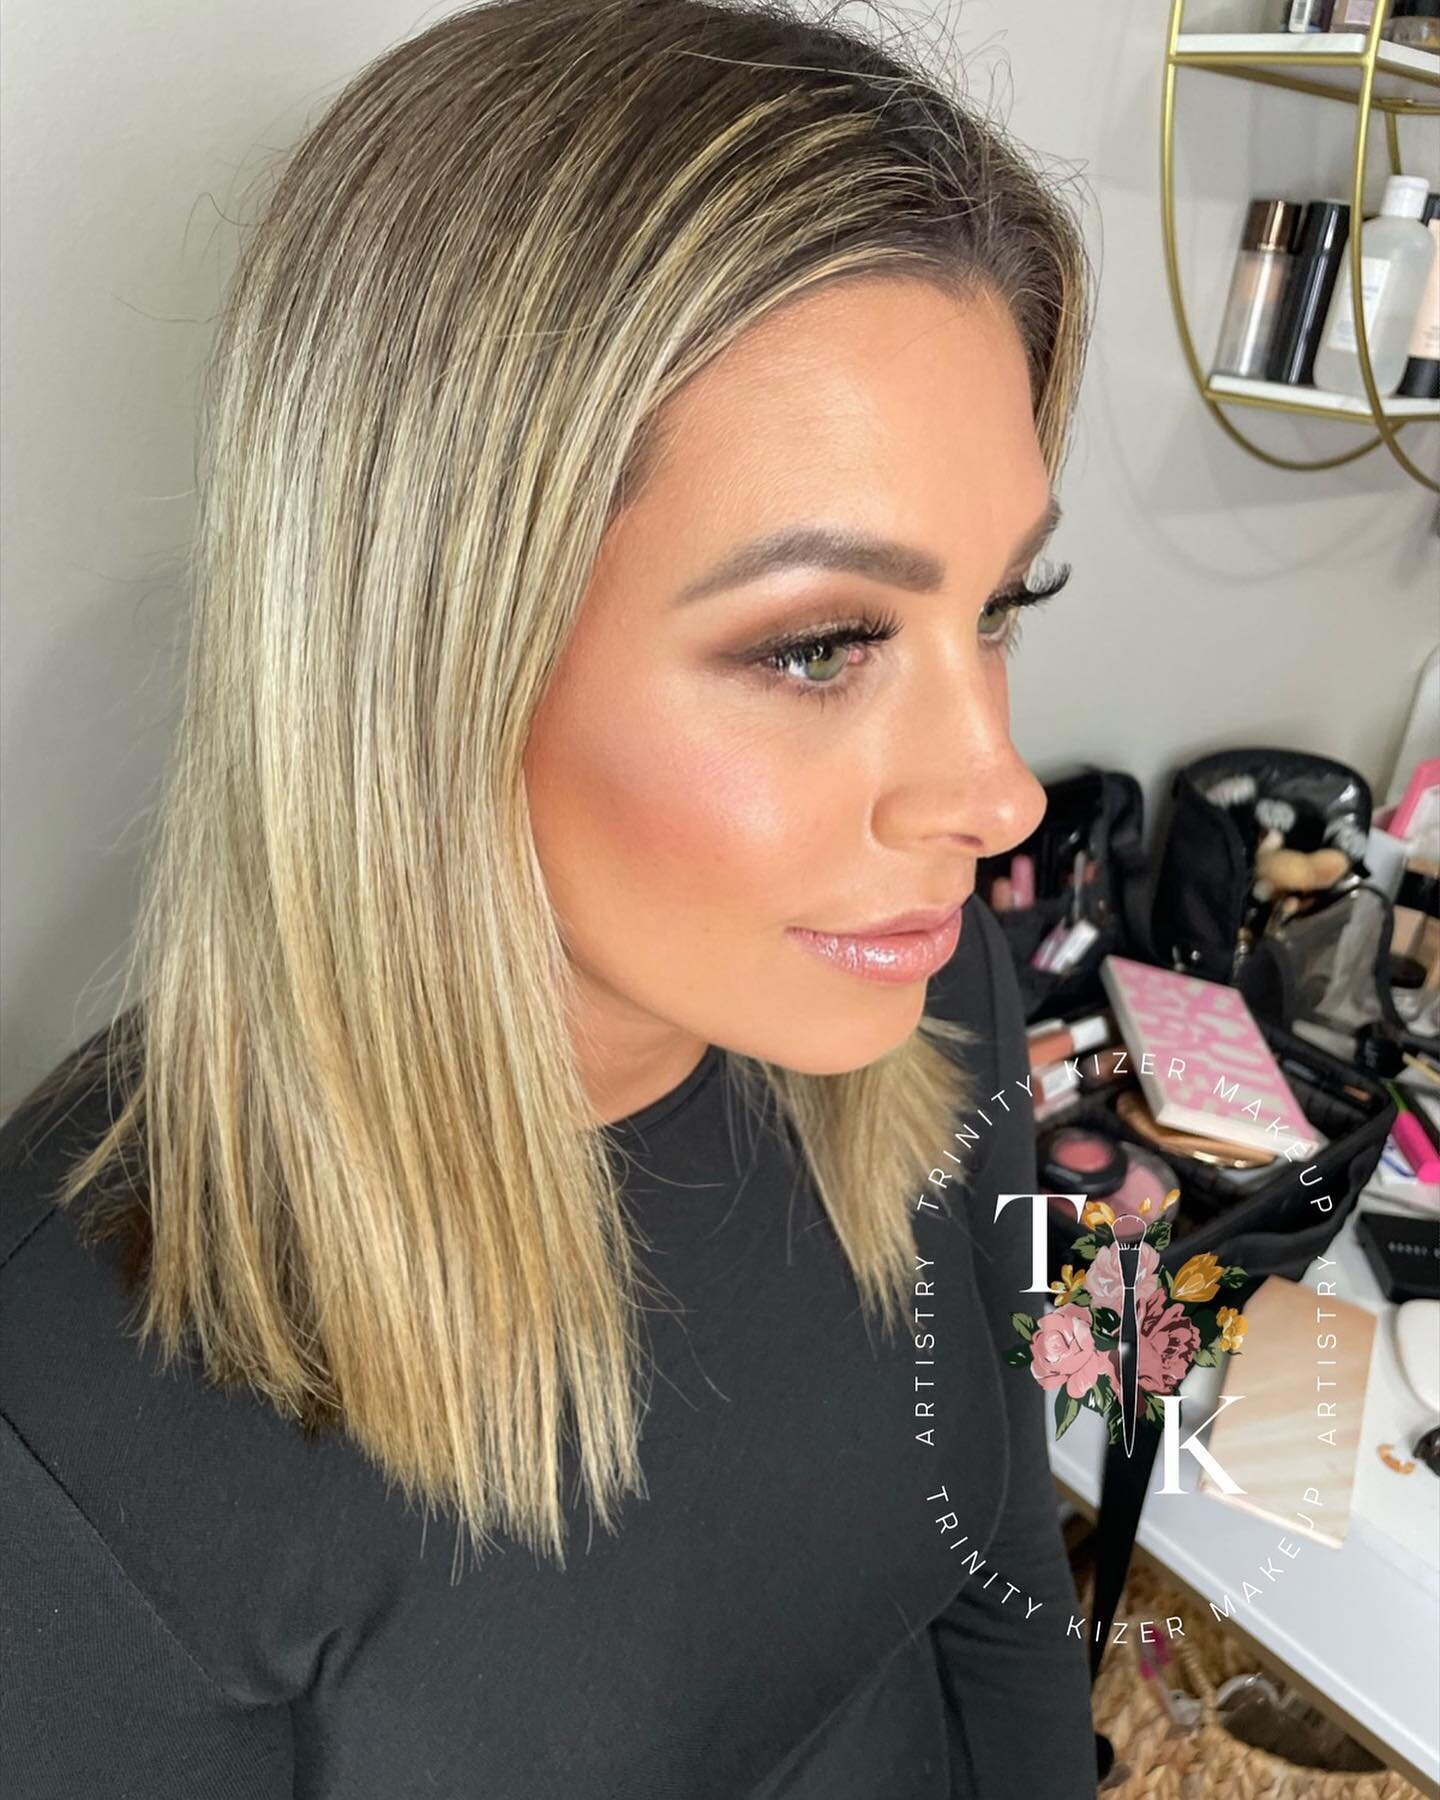 Meg&rsquo;s @meg_vertentes baby shower look last week trickled into this week for her photo shoot! One of our favorite glows we created together 💄Natural Bronzed Glow Glam
Always a pleasure seeing you babe ✨